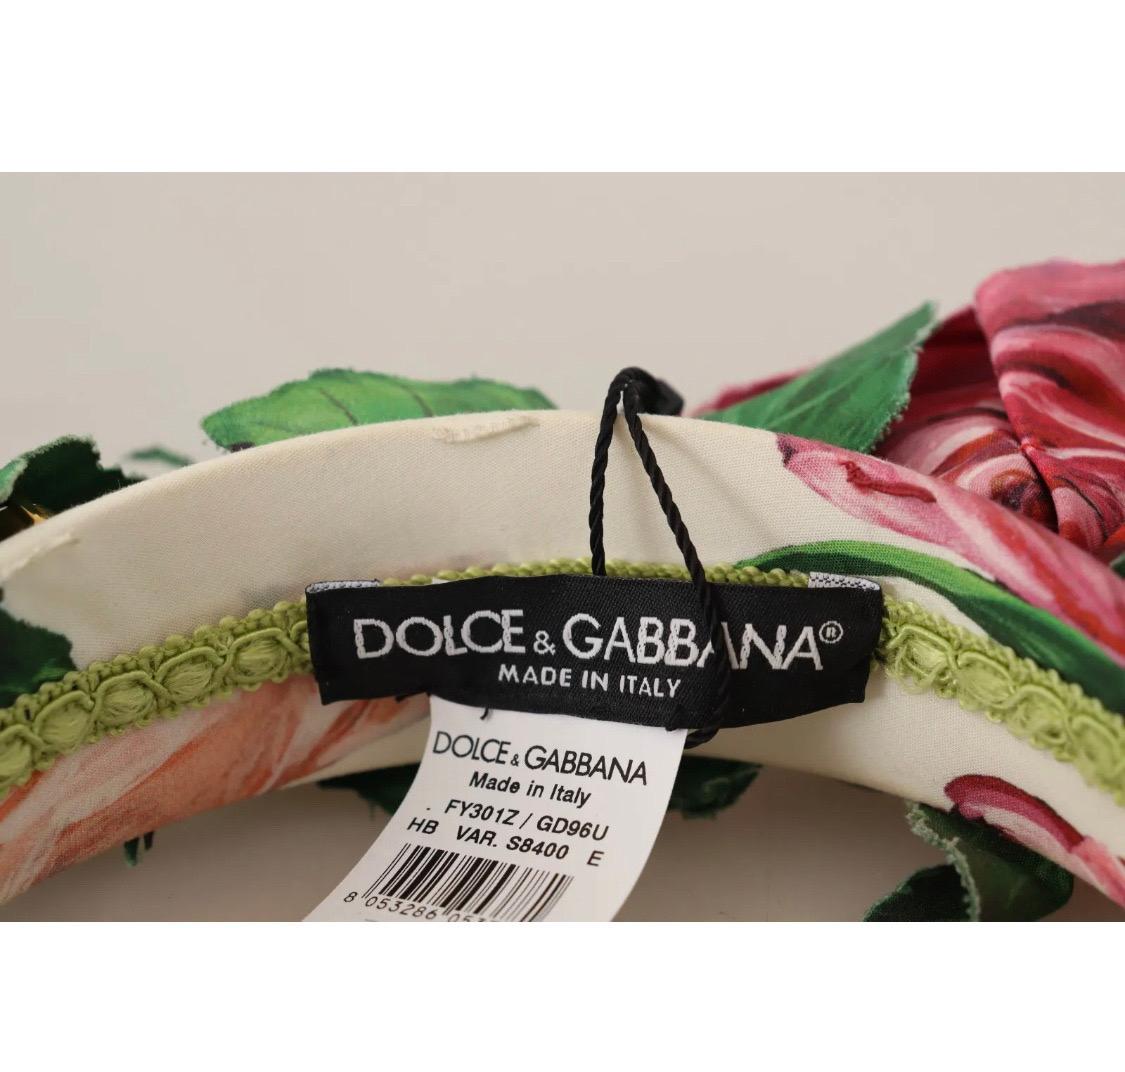 DOLCE & GABBANA

Absolutely stunning, 100% Authentic, brand new with tags Dolce & Gabbana wide headband. Domenico Dolce and Stefano Gabbana maxed out its brightness with voluminous roses surrounded by foliage. They are supported by large sparkling